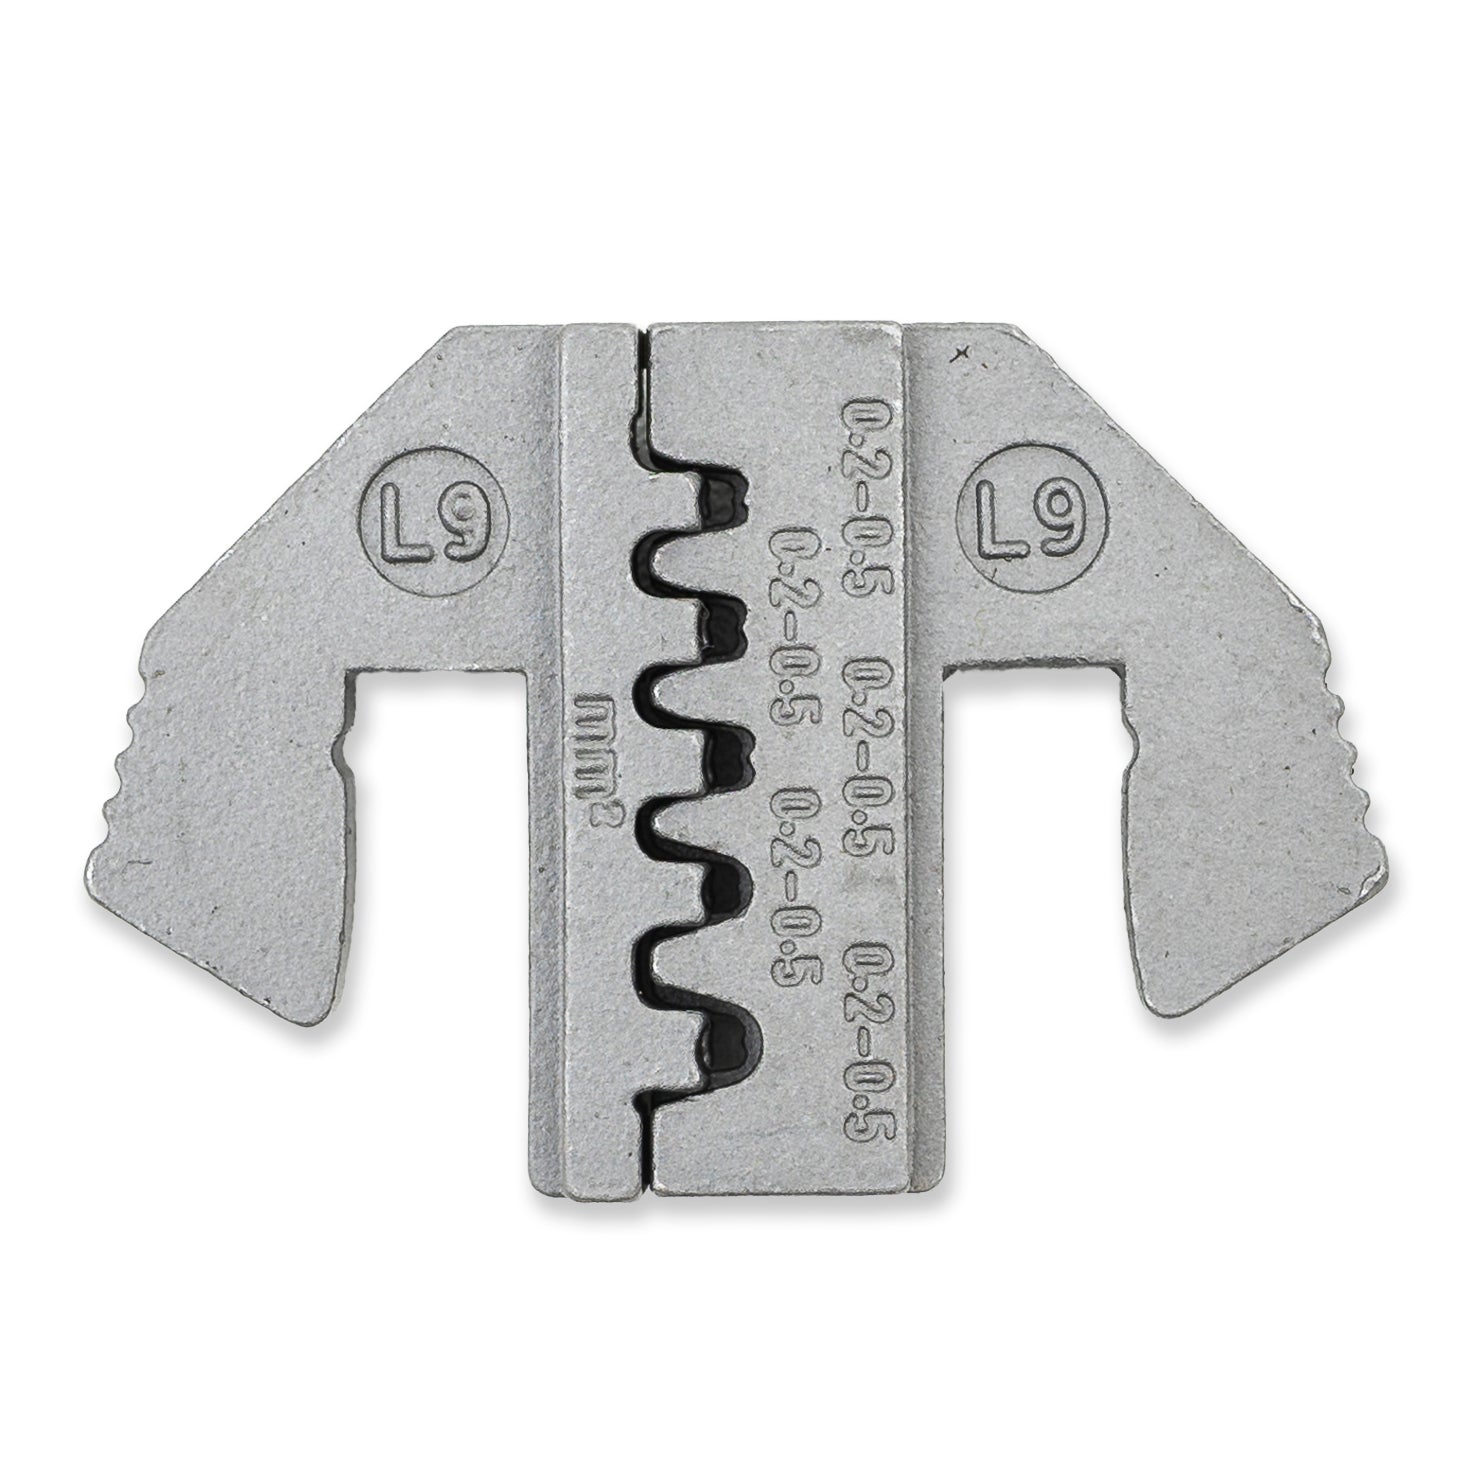 Crimping Tool Die - L9 Die for FASTIN-FASTON 2.8, ST, SPT, JPT 2.8, JT 2.8, Positive Lock 6.3 Contact - Tool Guy Republic